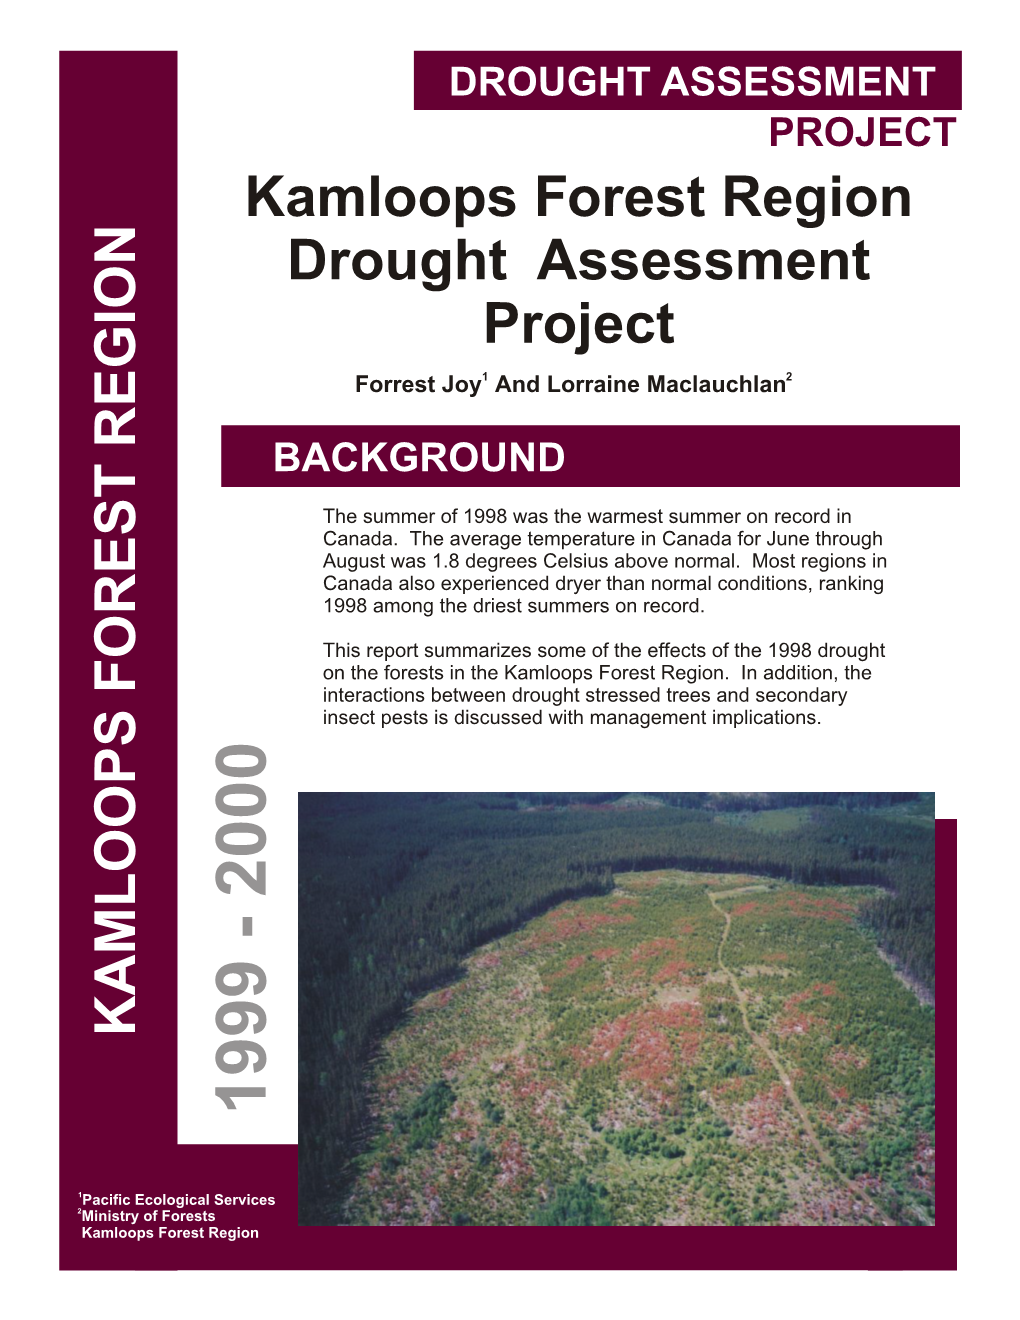 Kamloops Forest Region Drought Assessment Project